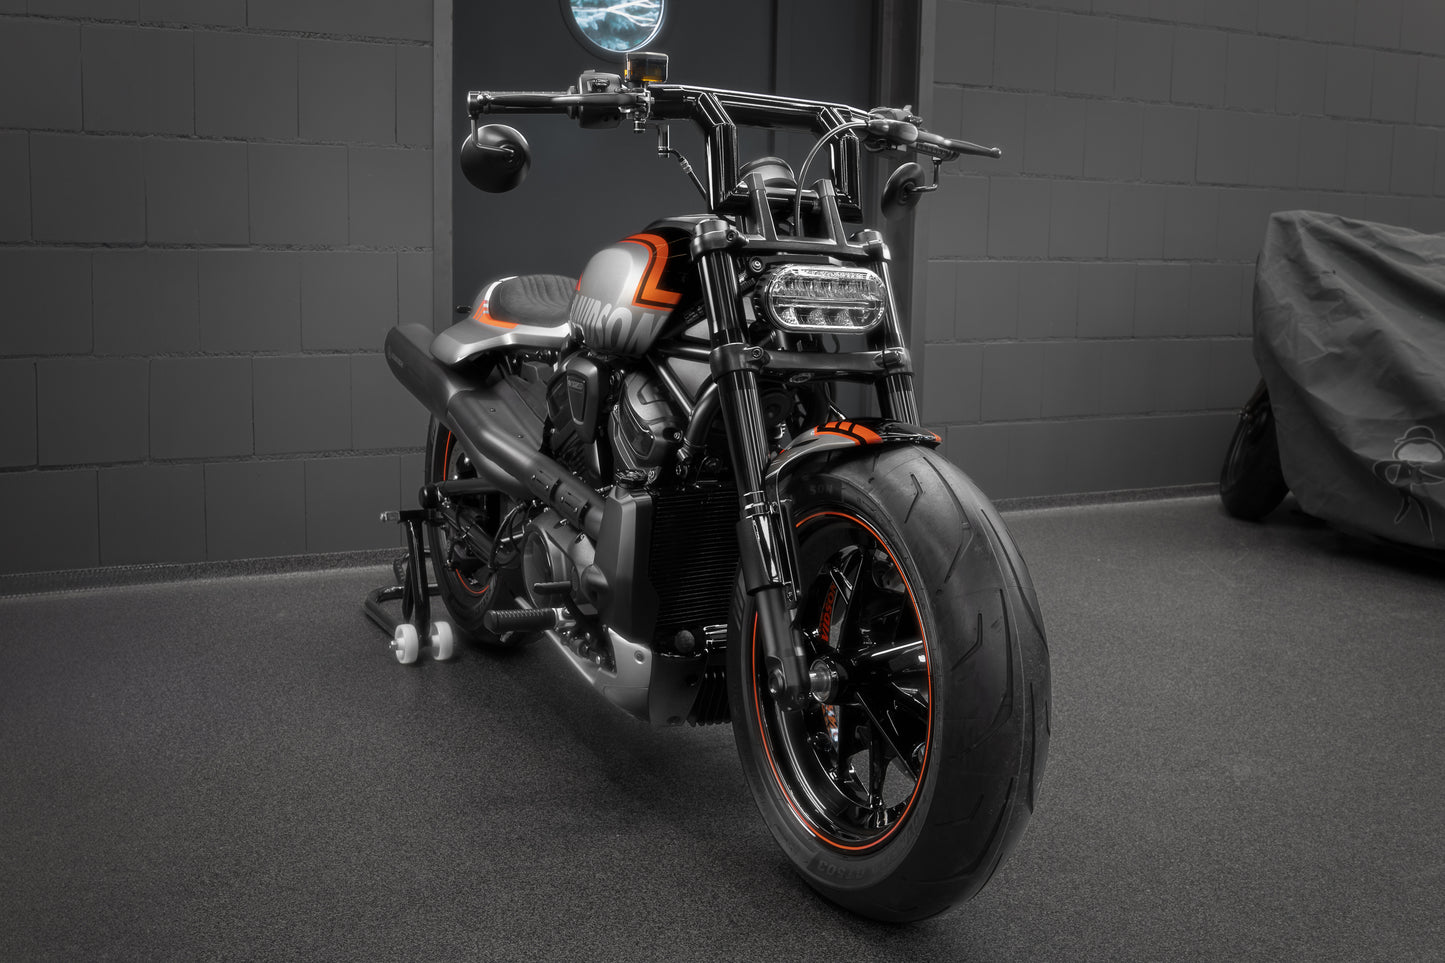 Harley Davidson motorcycle with Killer Custom "Killer Bull" t-bar from the front in a modern garage